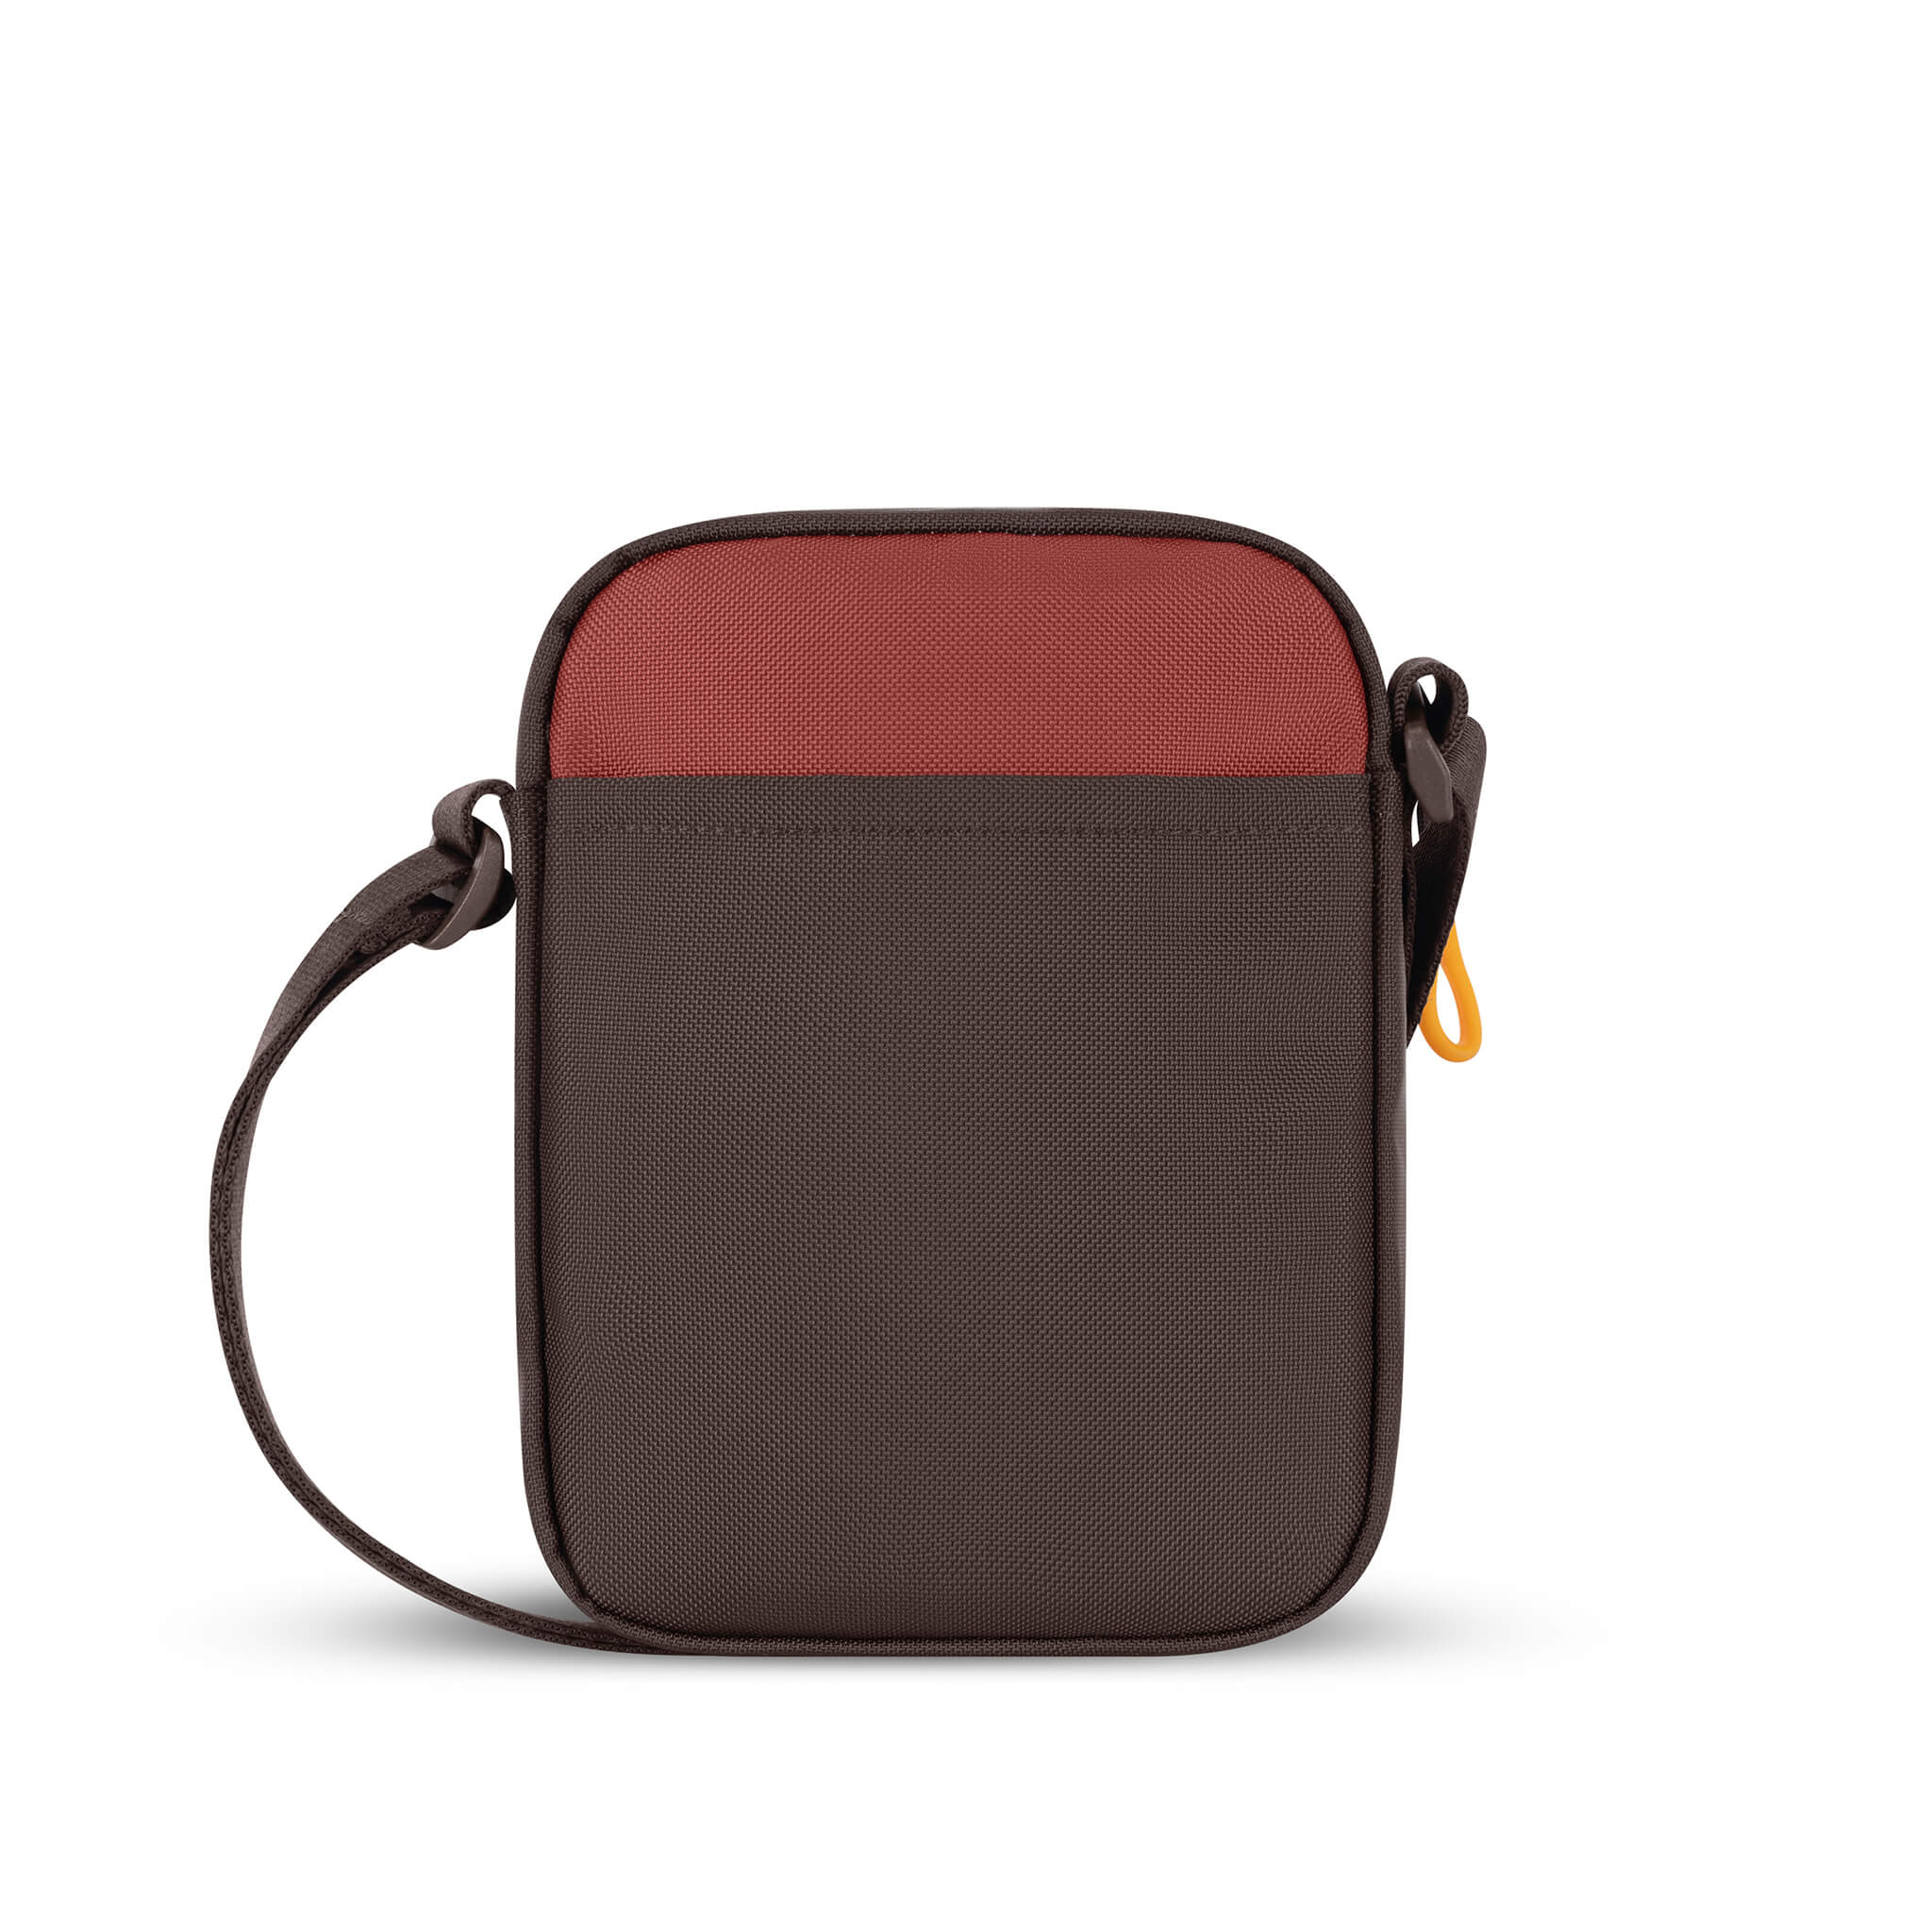 Back view of Sherpani mini crossbody purse, the Rogue in Cider. Rogue features include an adjustable crossbody strap, detachable keychain, compact design, minimalist bag, RFID protection and back slip pocket. The Cider color is two-toned in burgundy and dark brown with yellow accents.